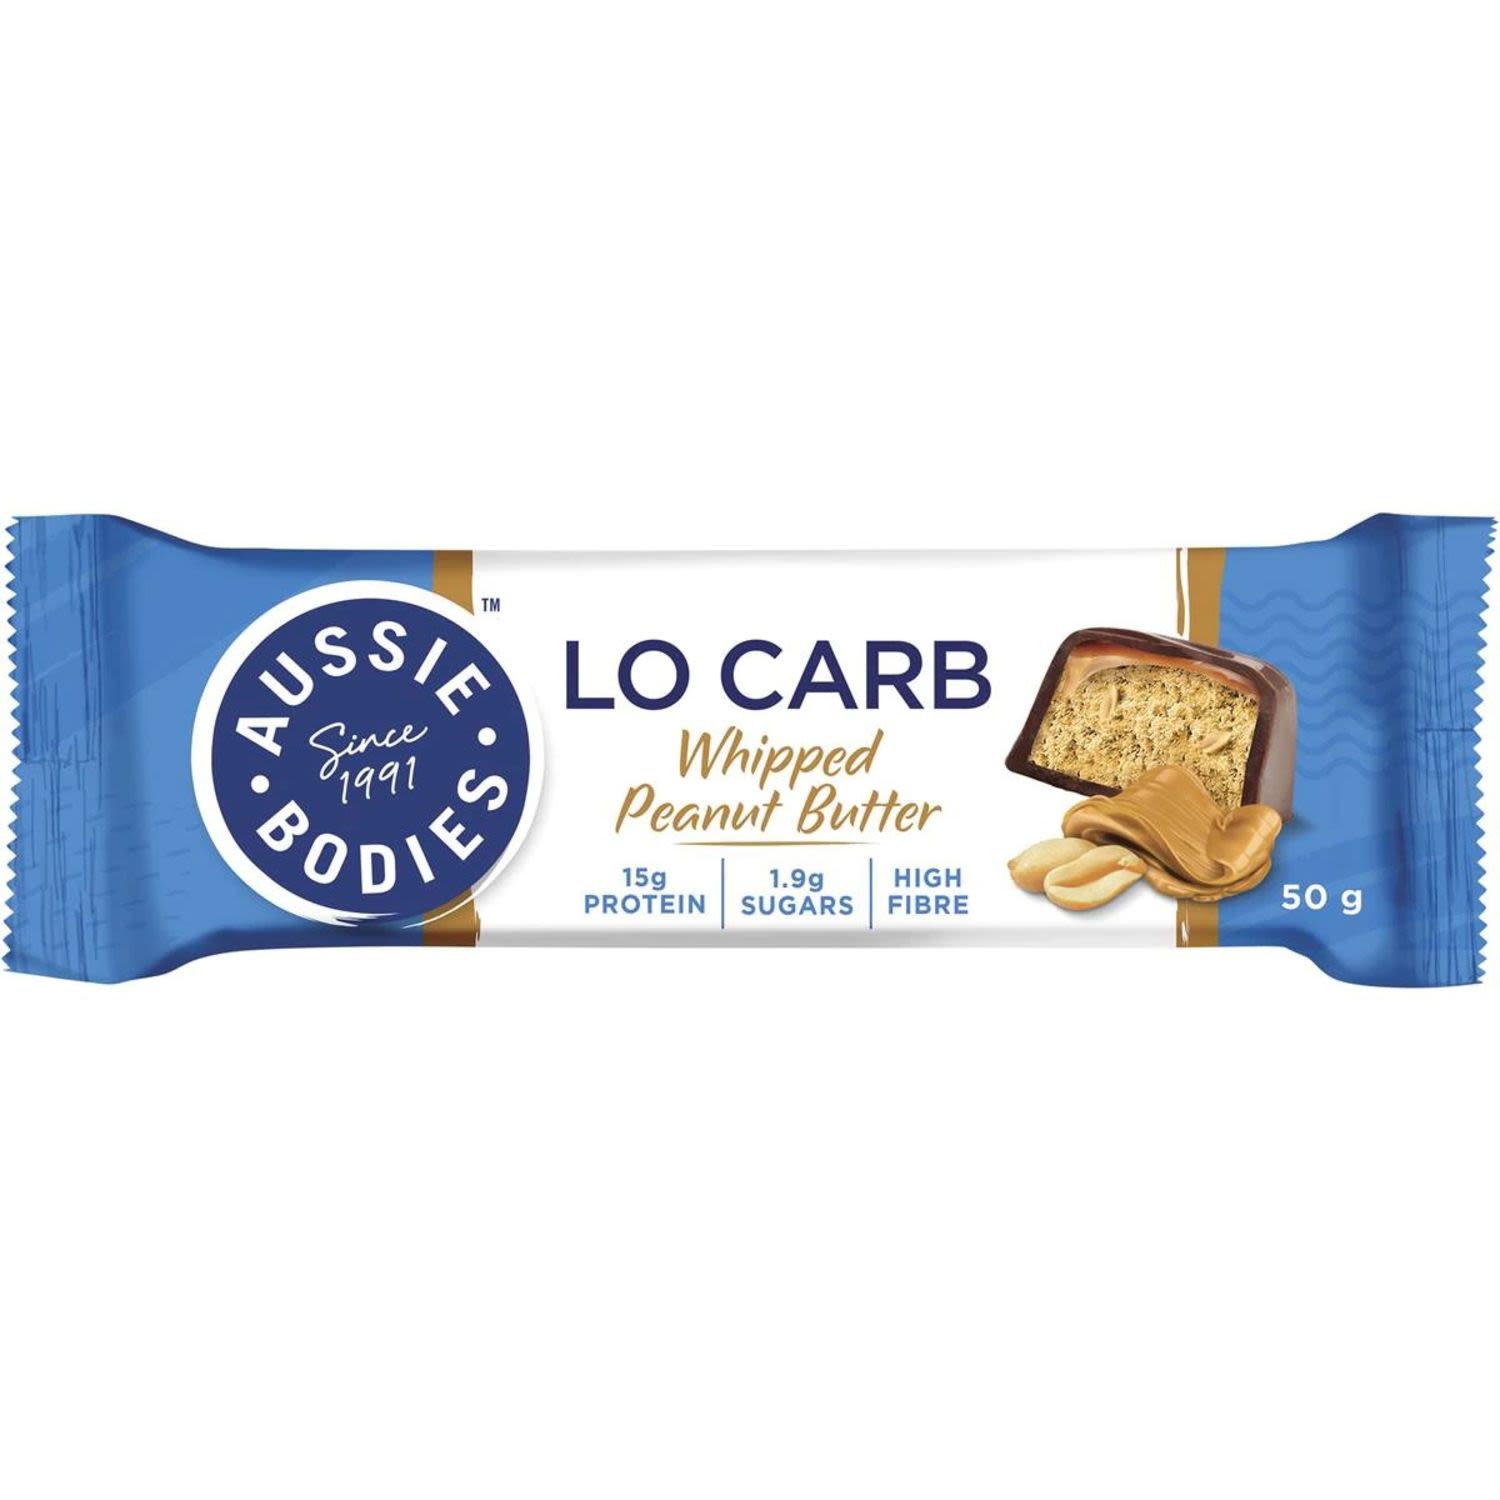 Aussie Bodies Lo Carb Whipped Peanut Butter, 50 Gram